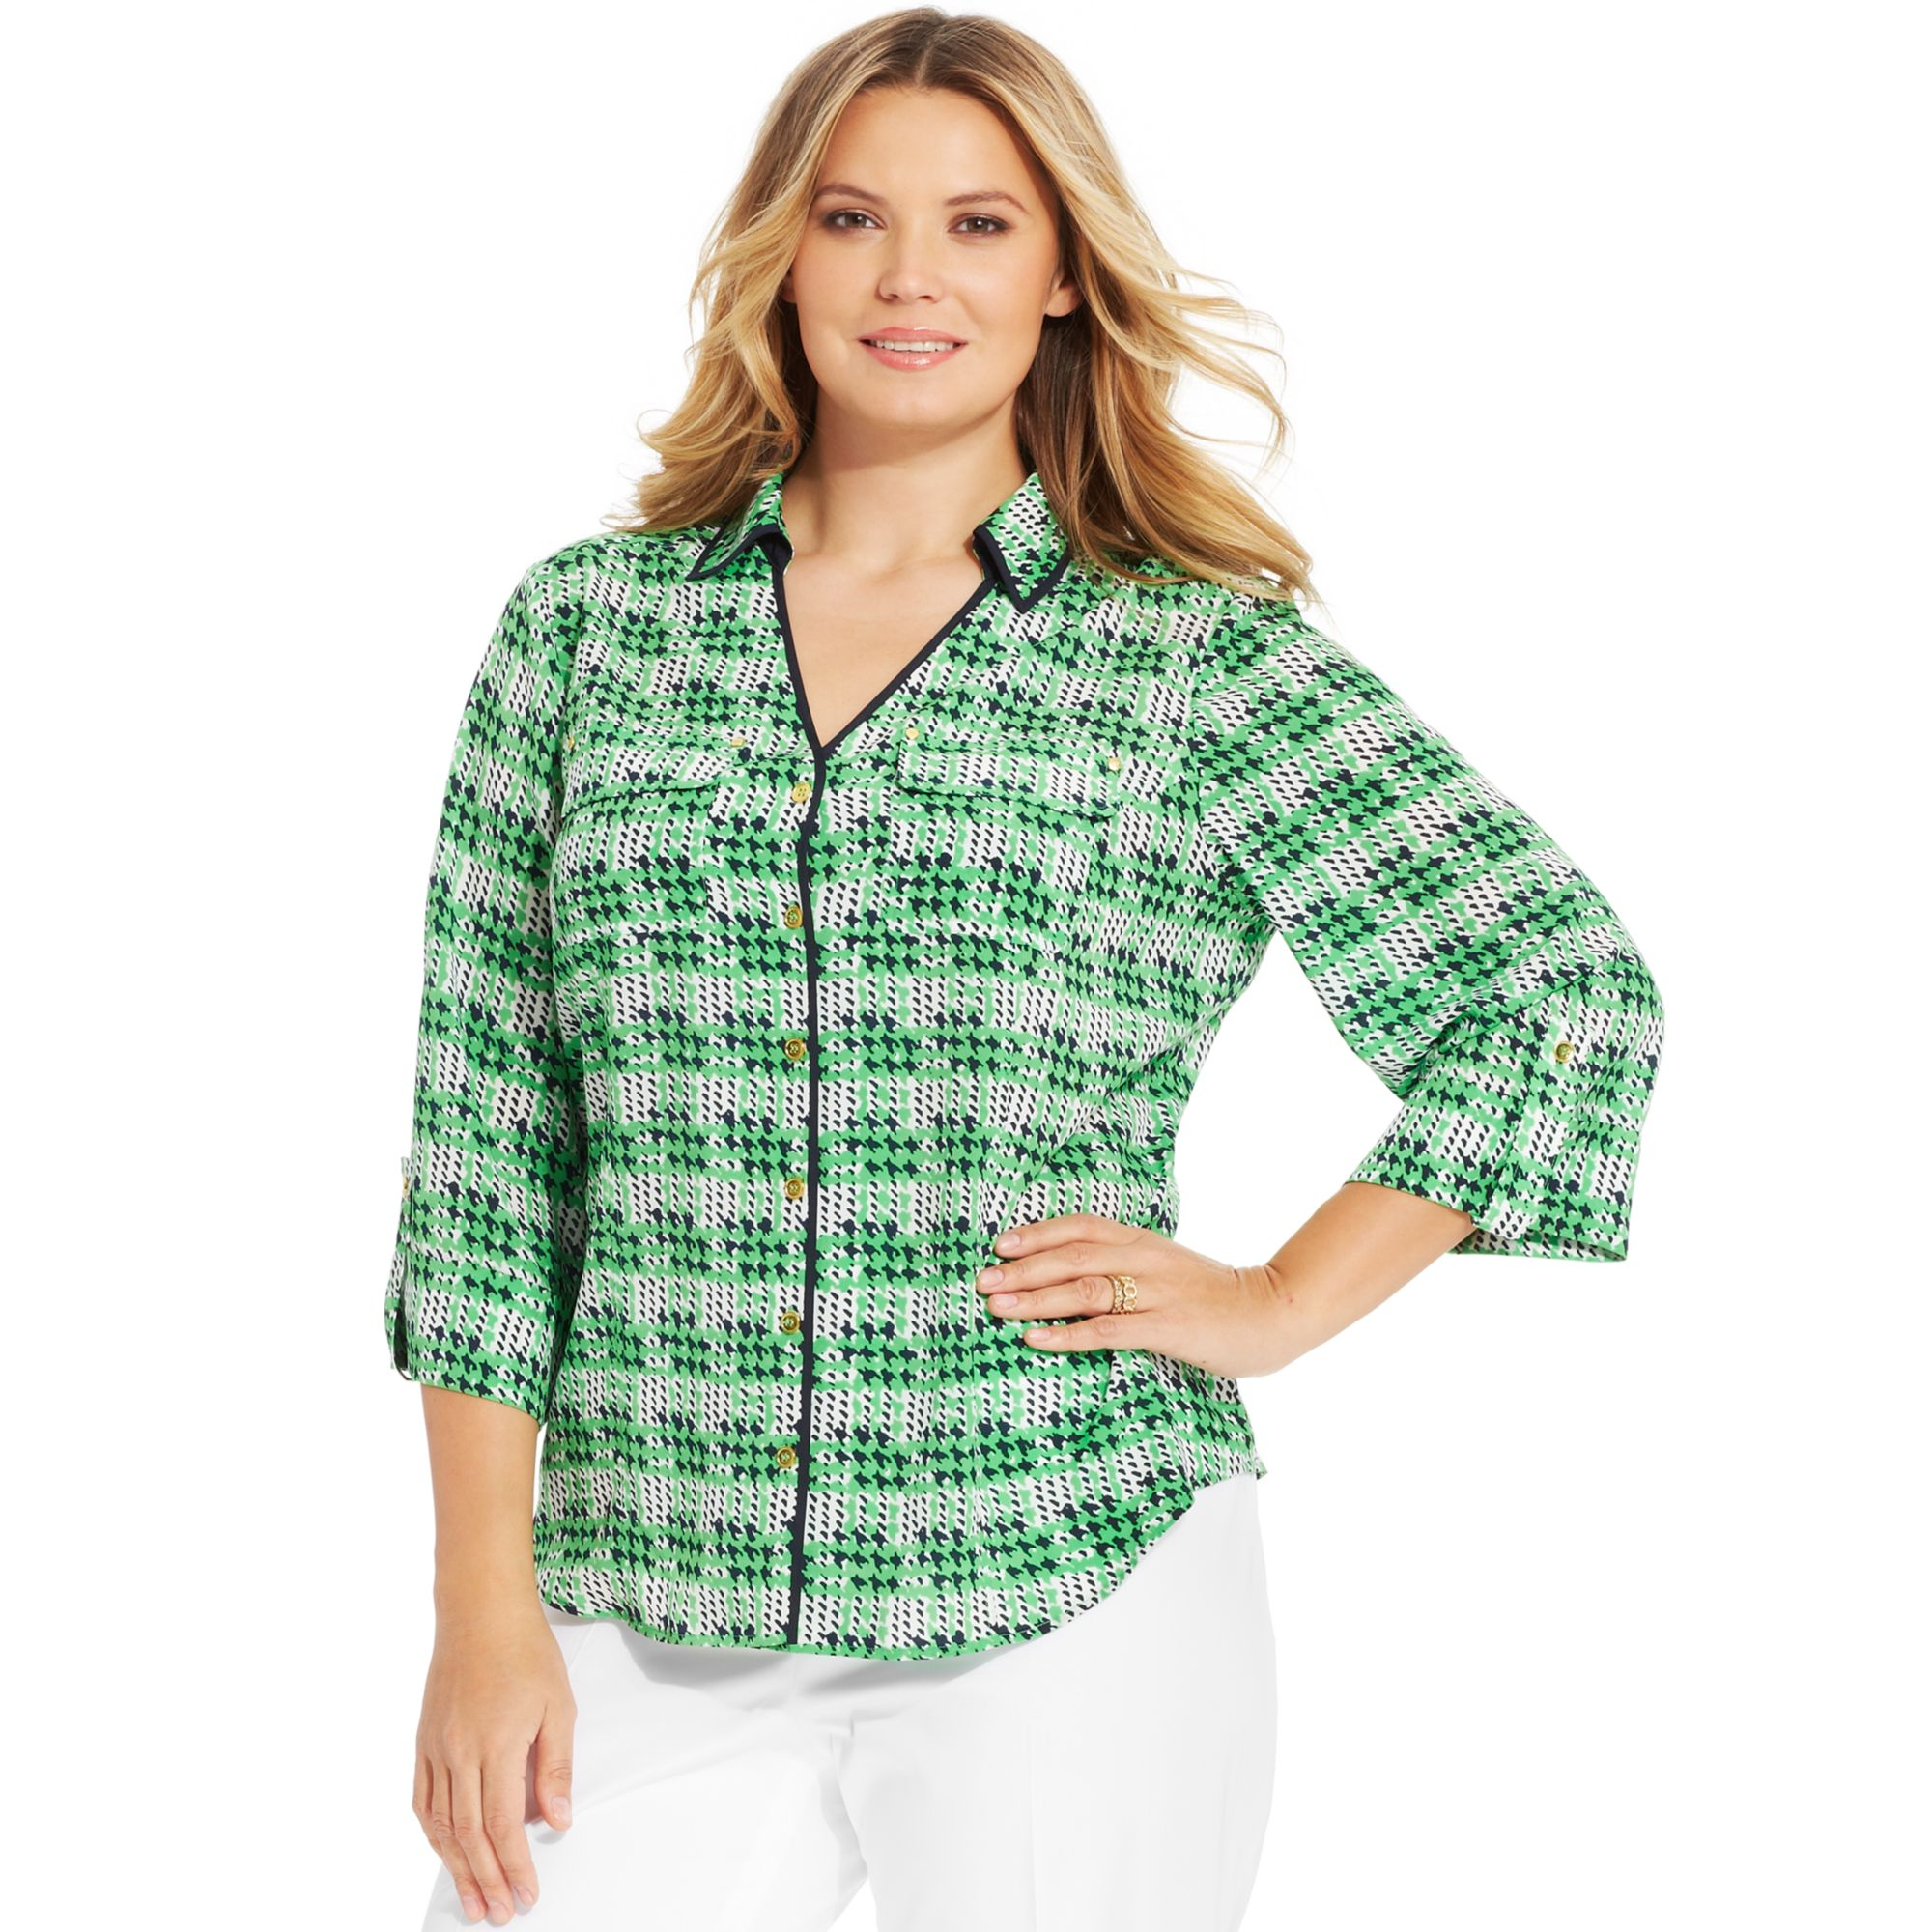 New york collection blouses plus size tops – Travel shorts with